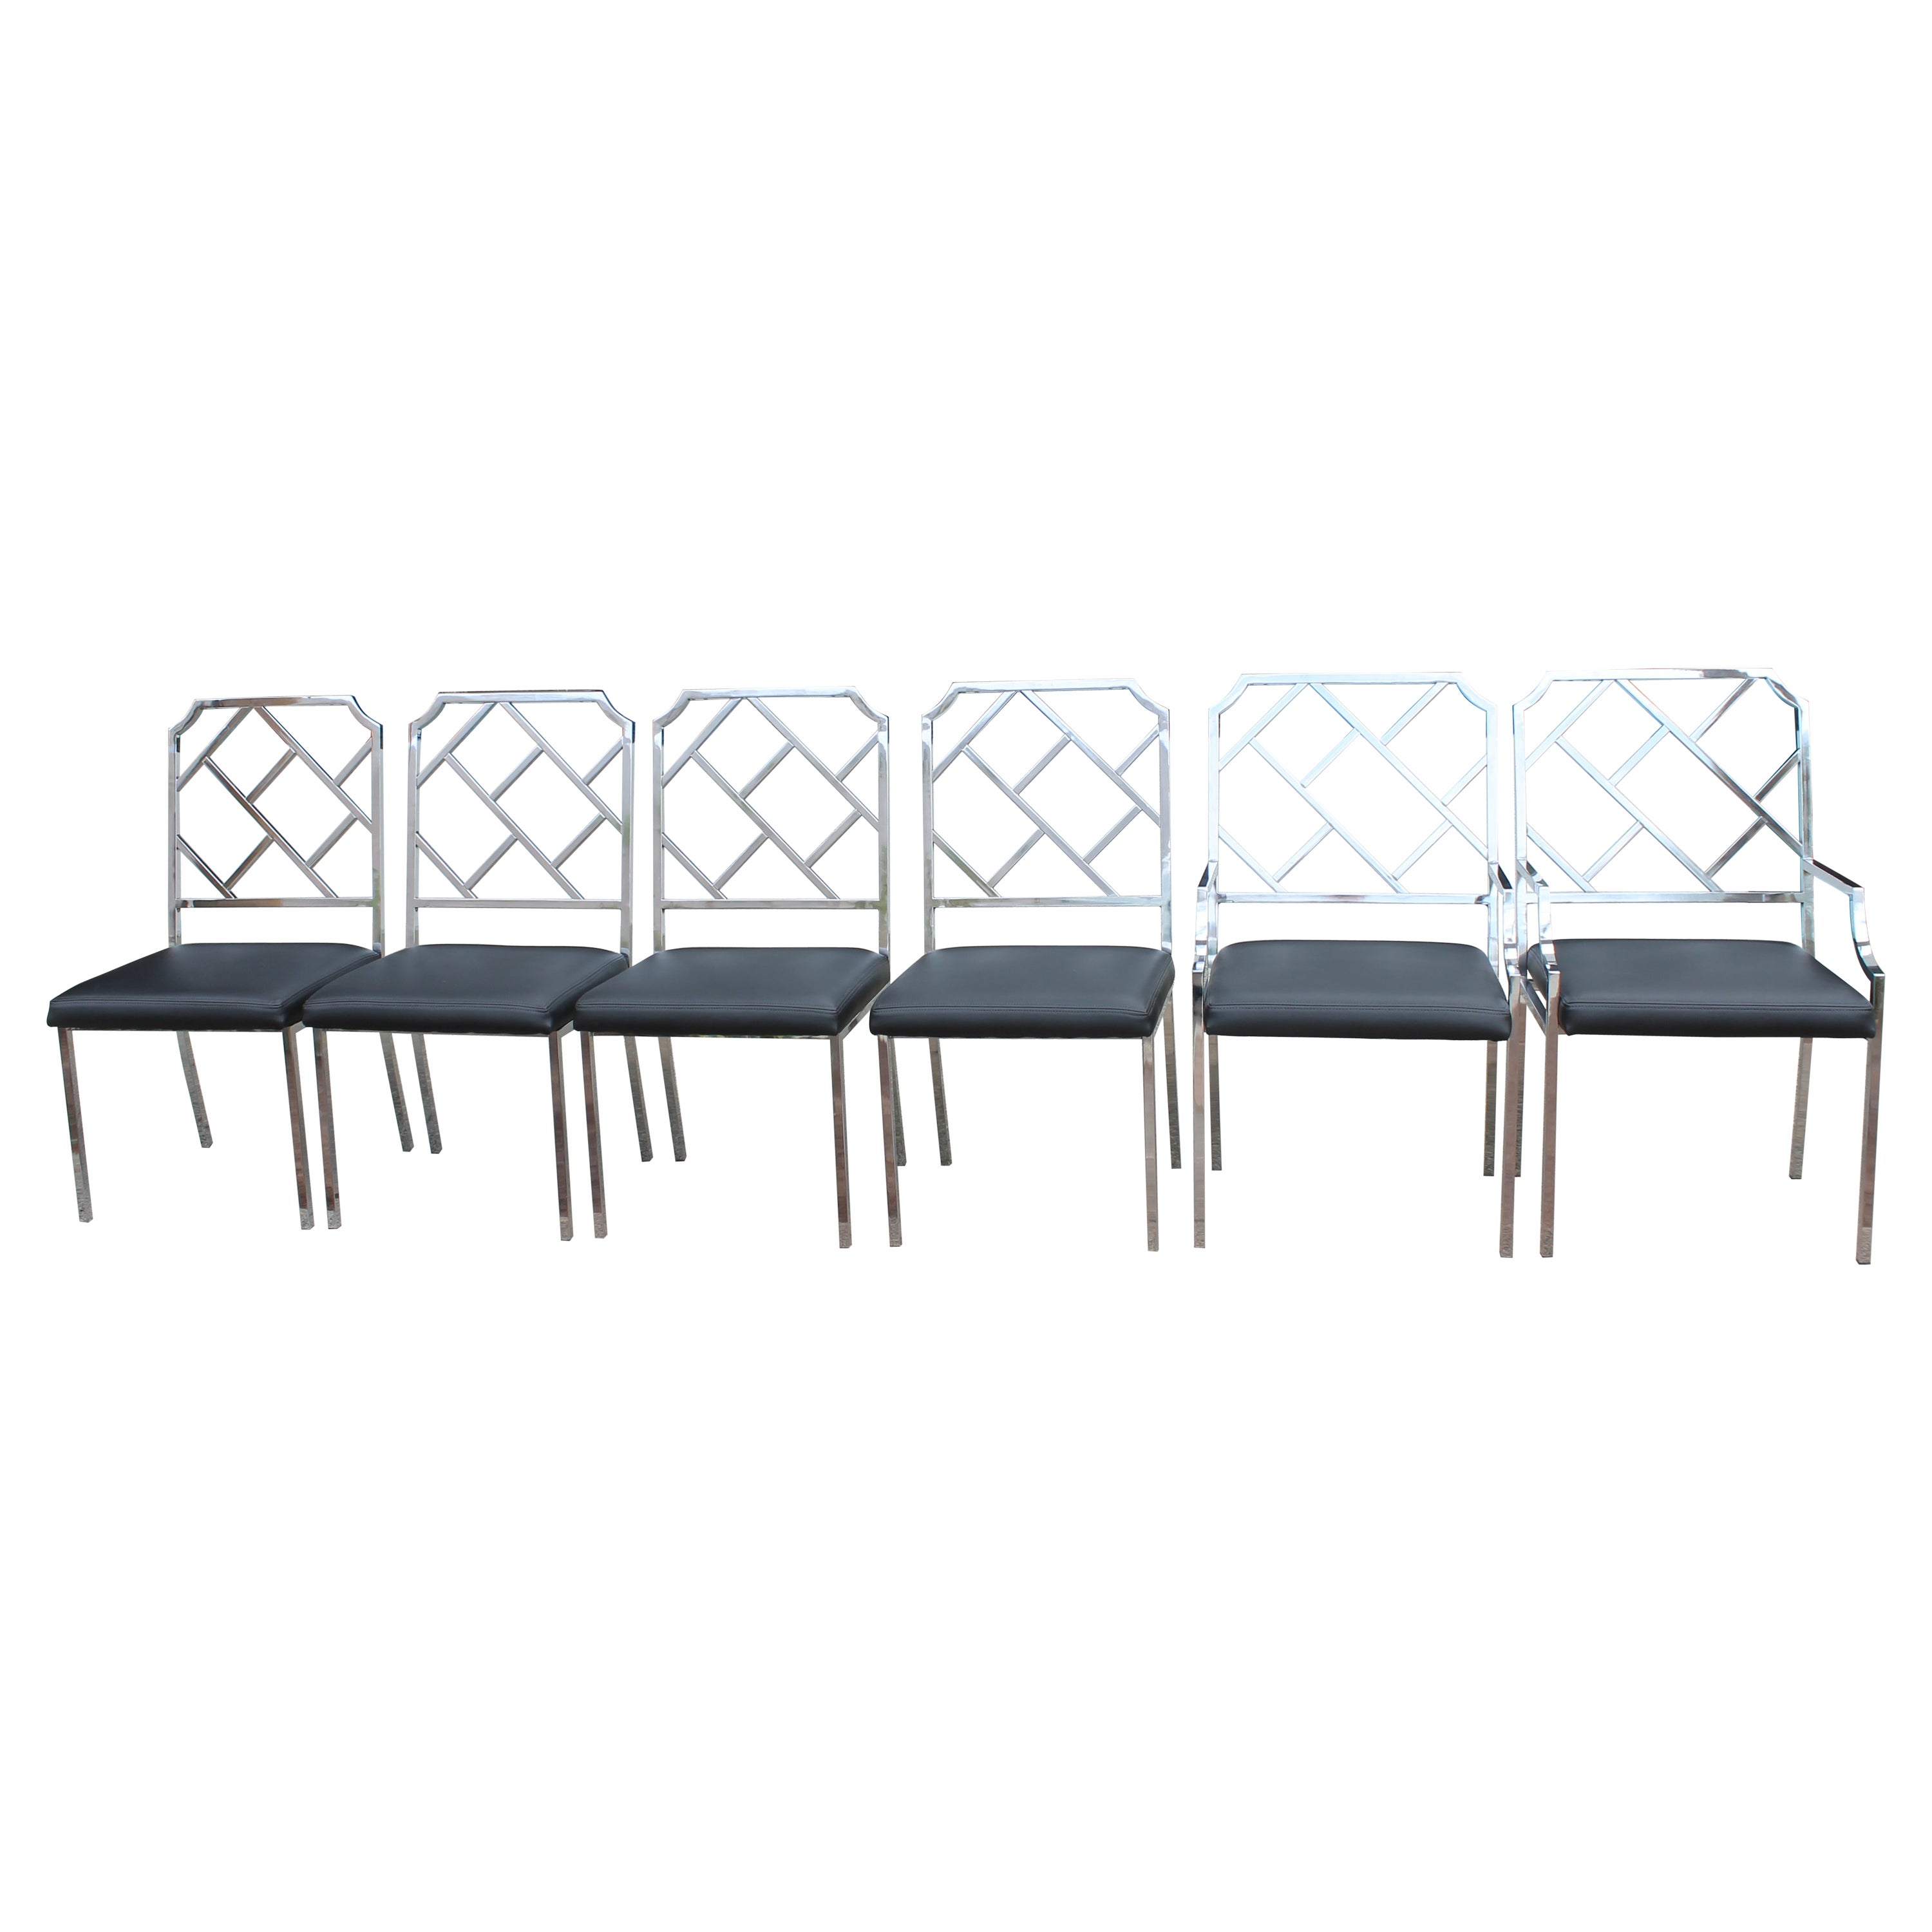 Six Chrome Dining Chairs by Design Institute of America 'DIA'